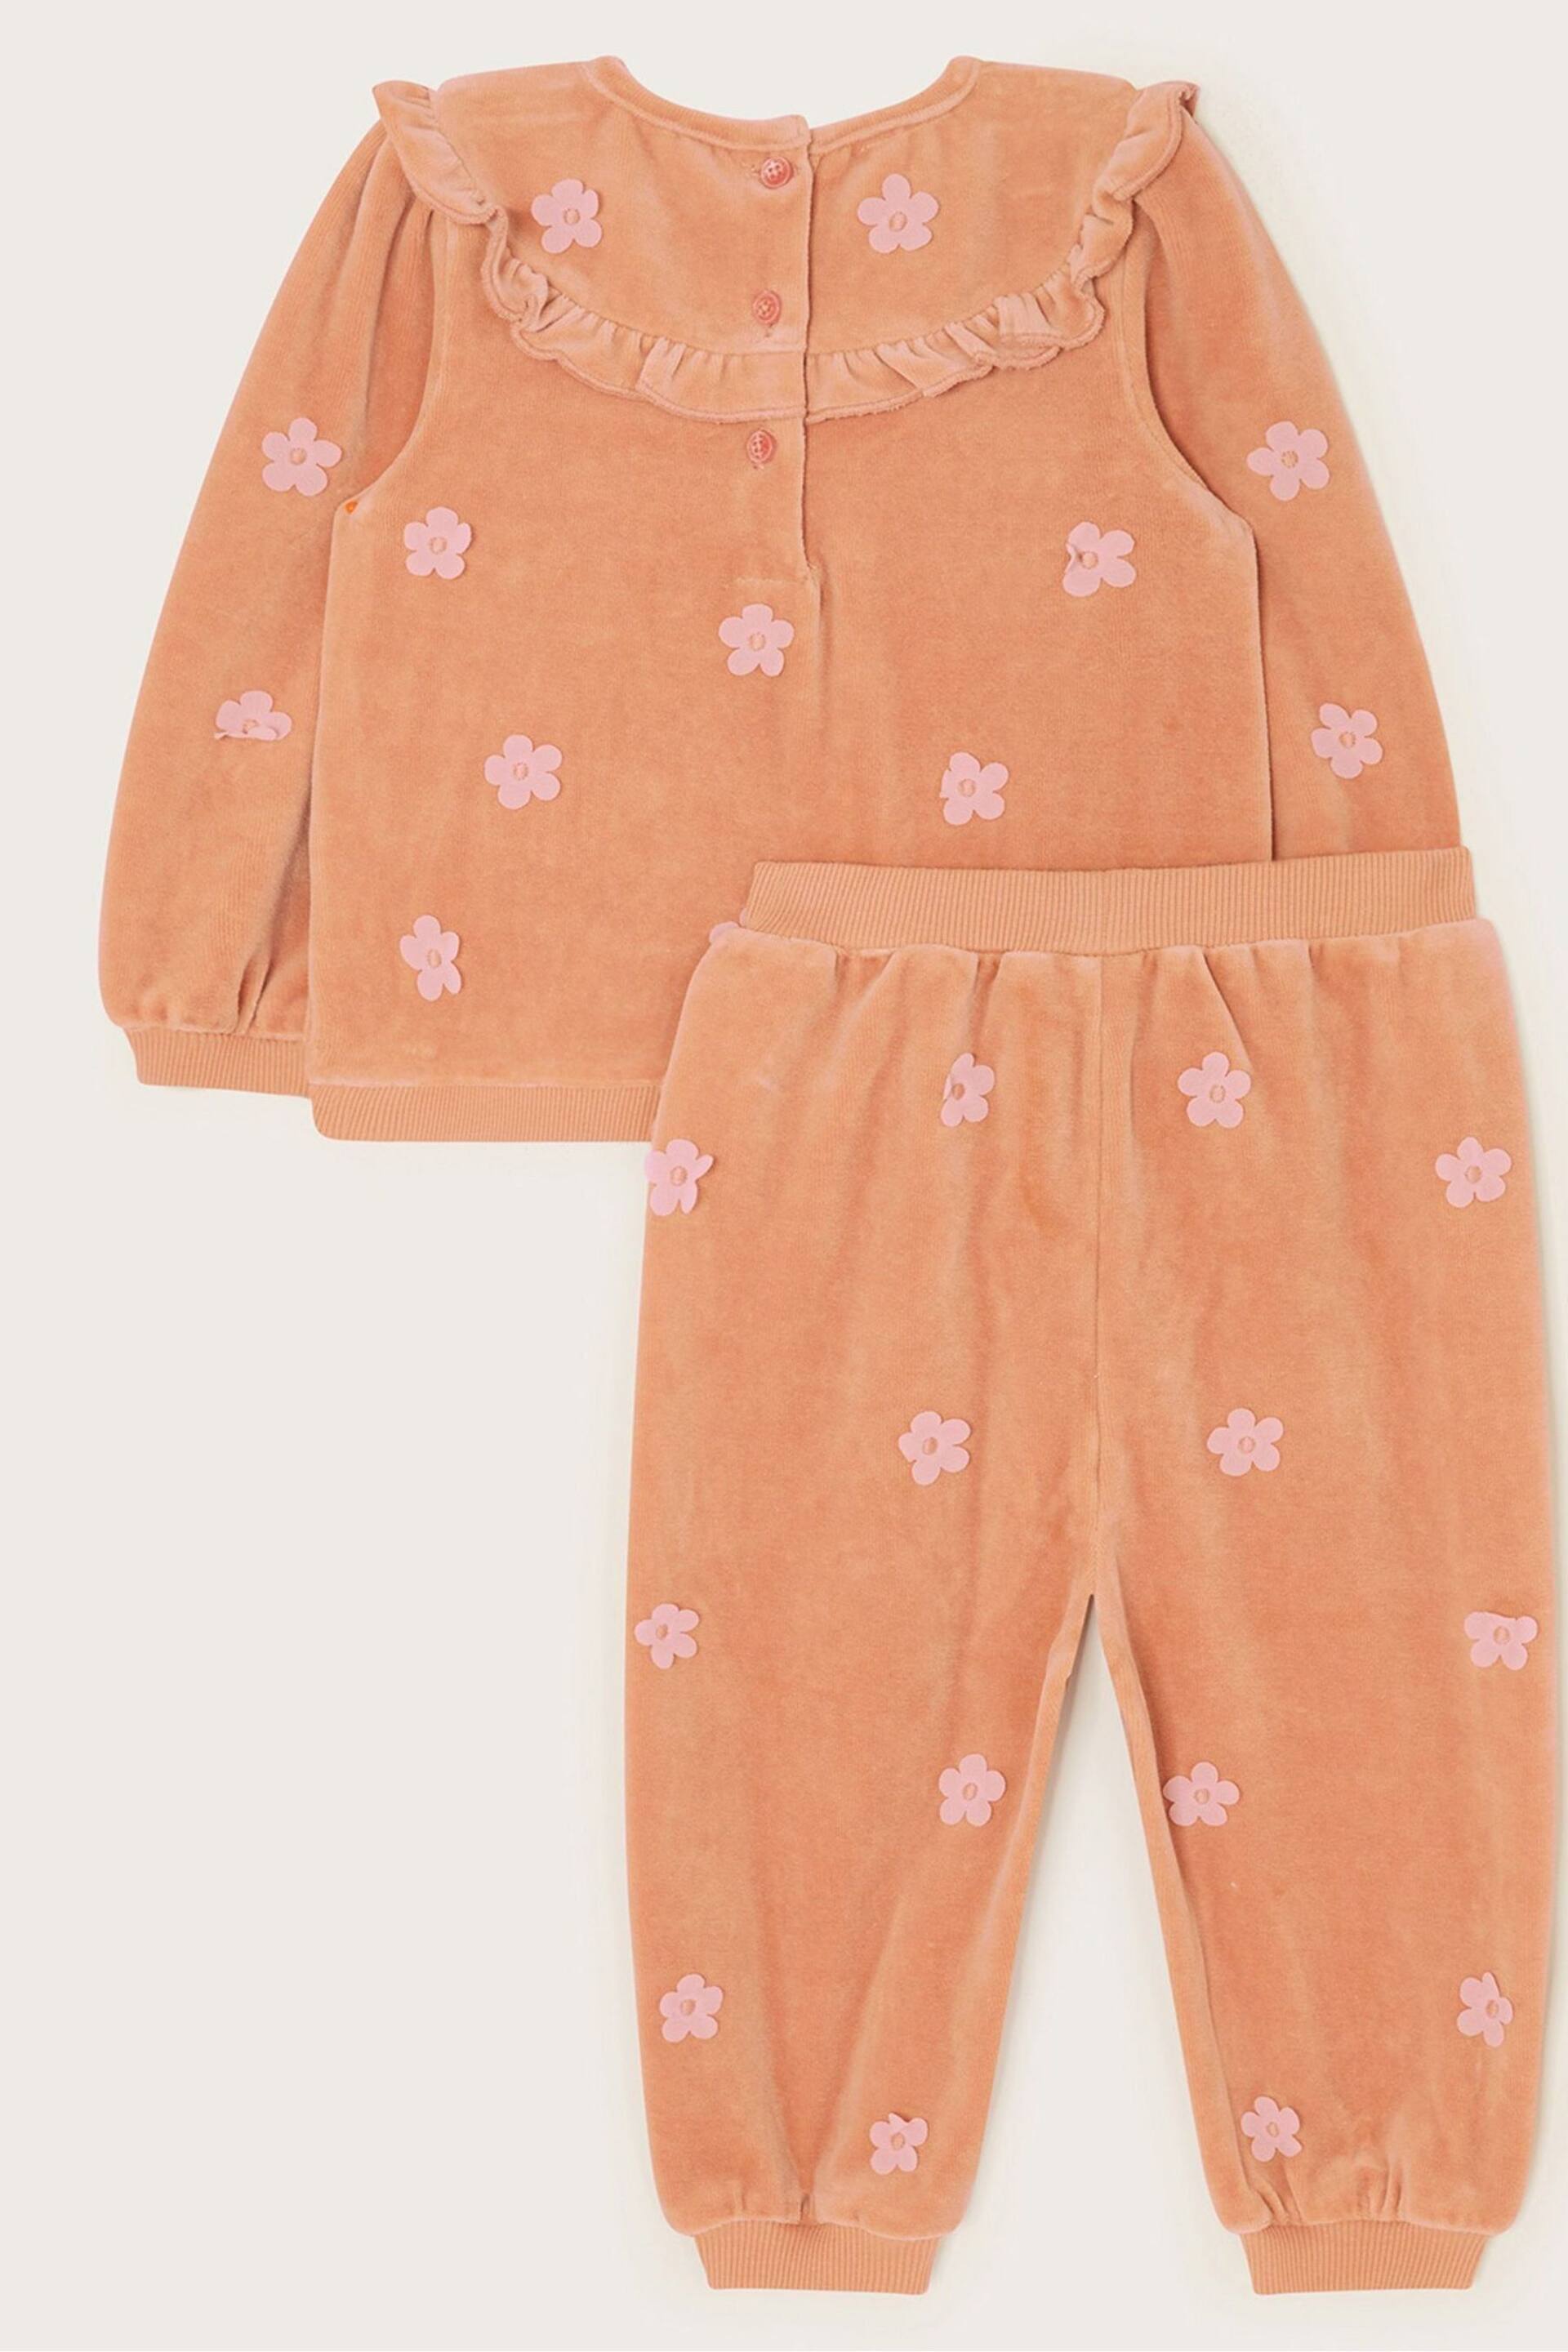 Monsoon Pink Baby Floral Velour Jumper and Joggers Set - Image 2 of 3